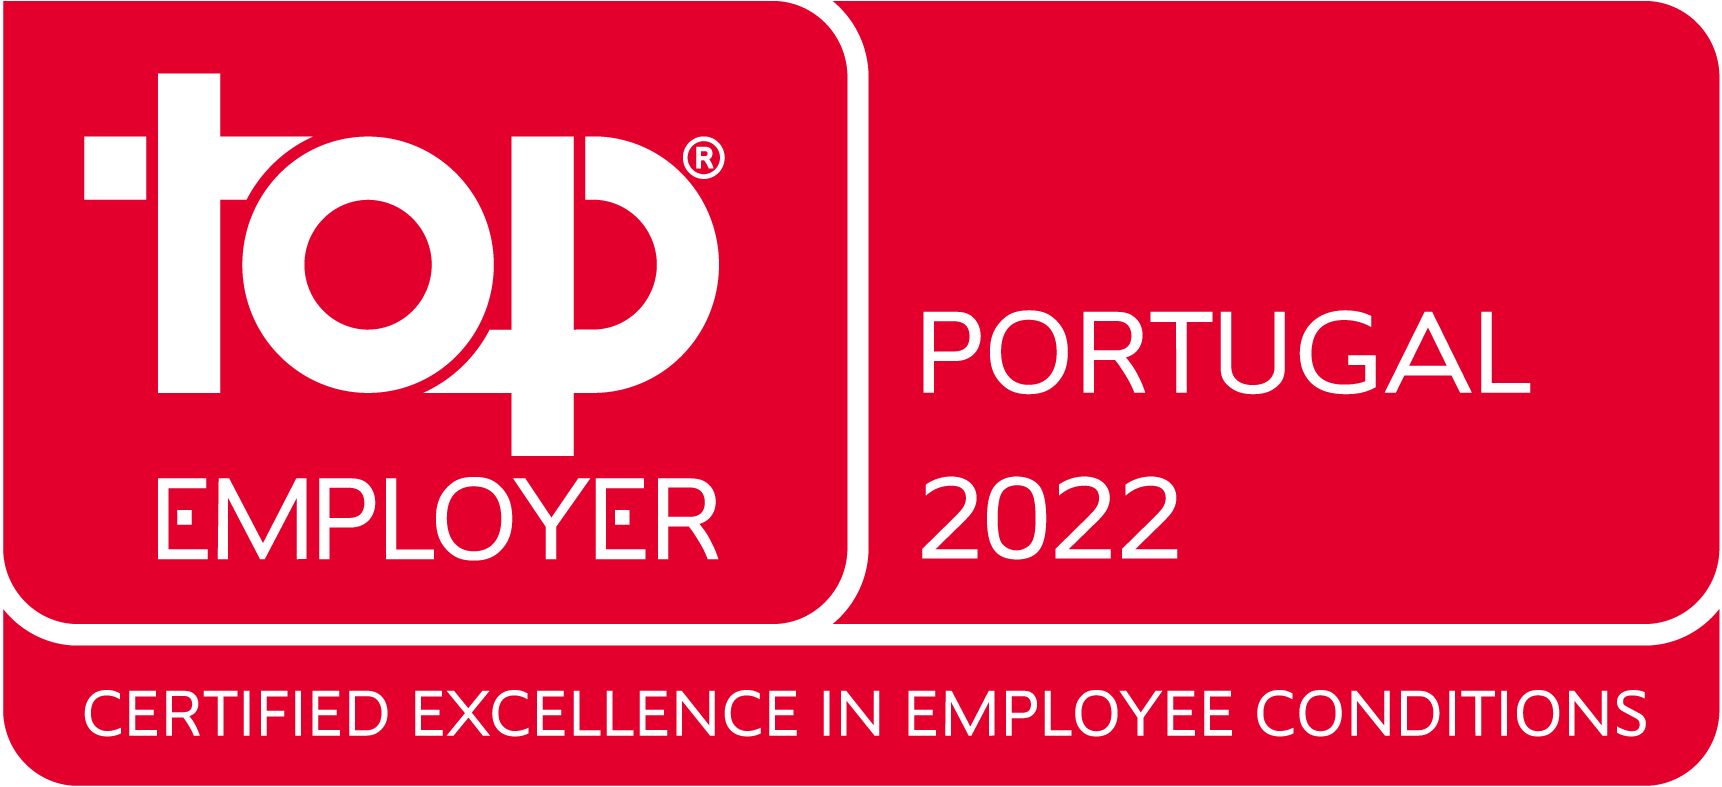 Top Employer Portugal 2022 